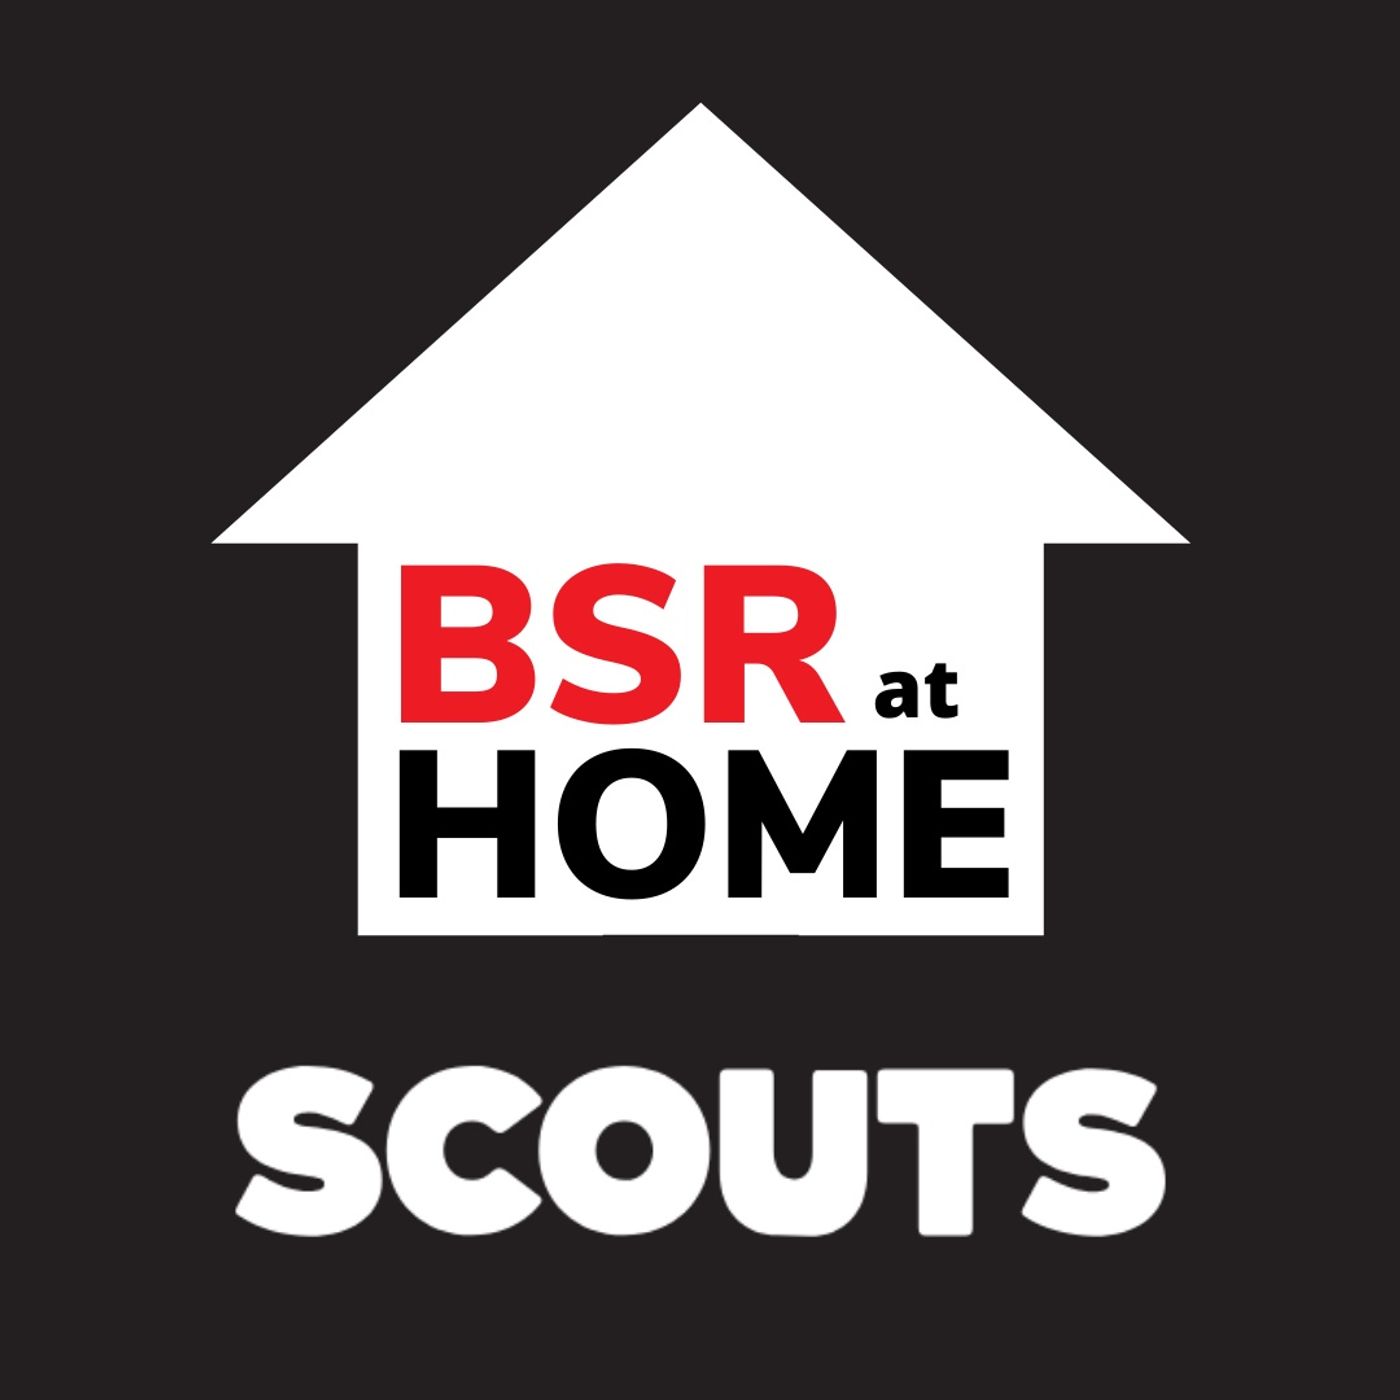 BSR at Home - Scouts